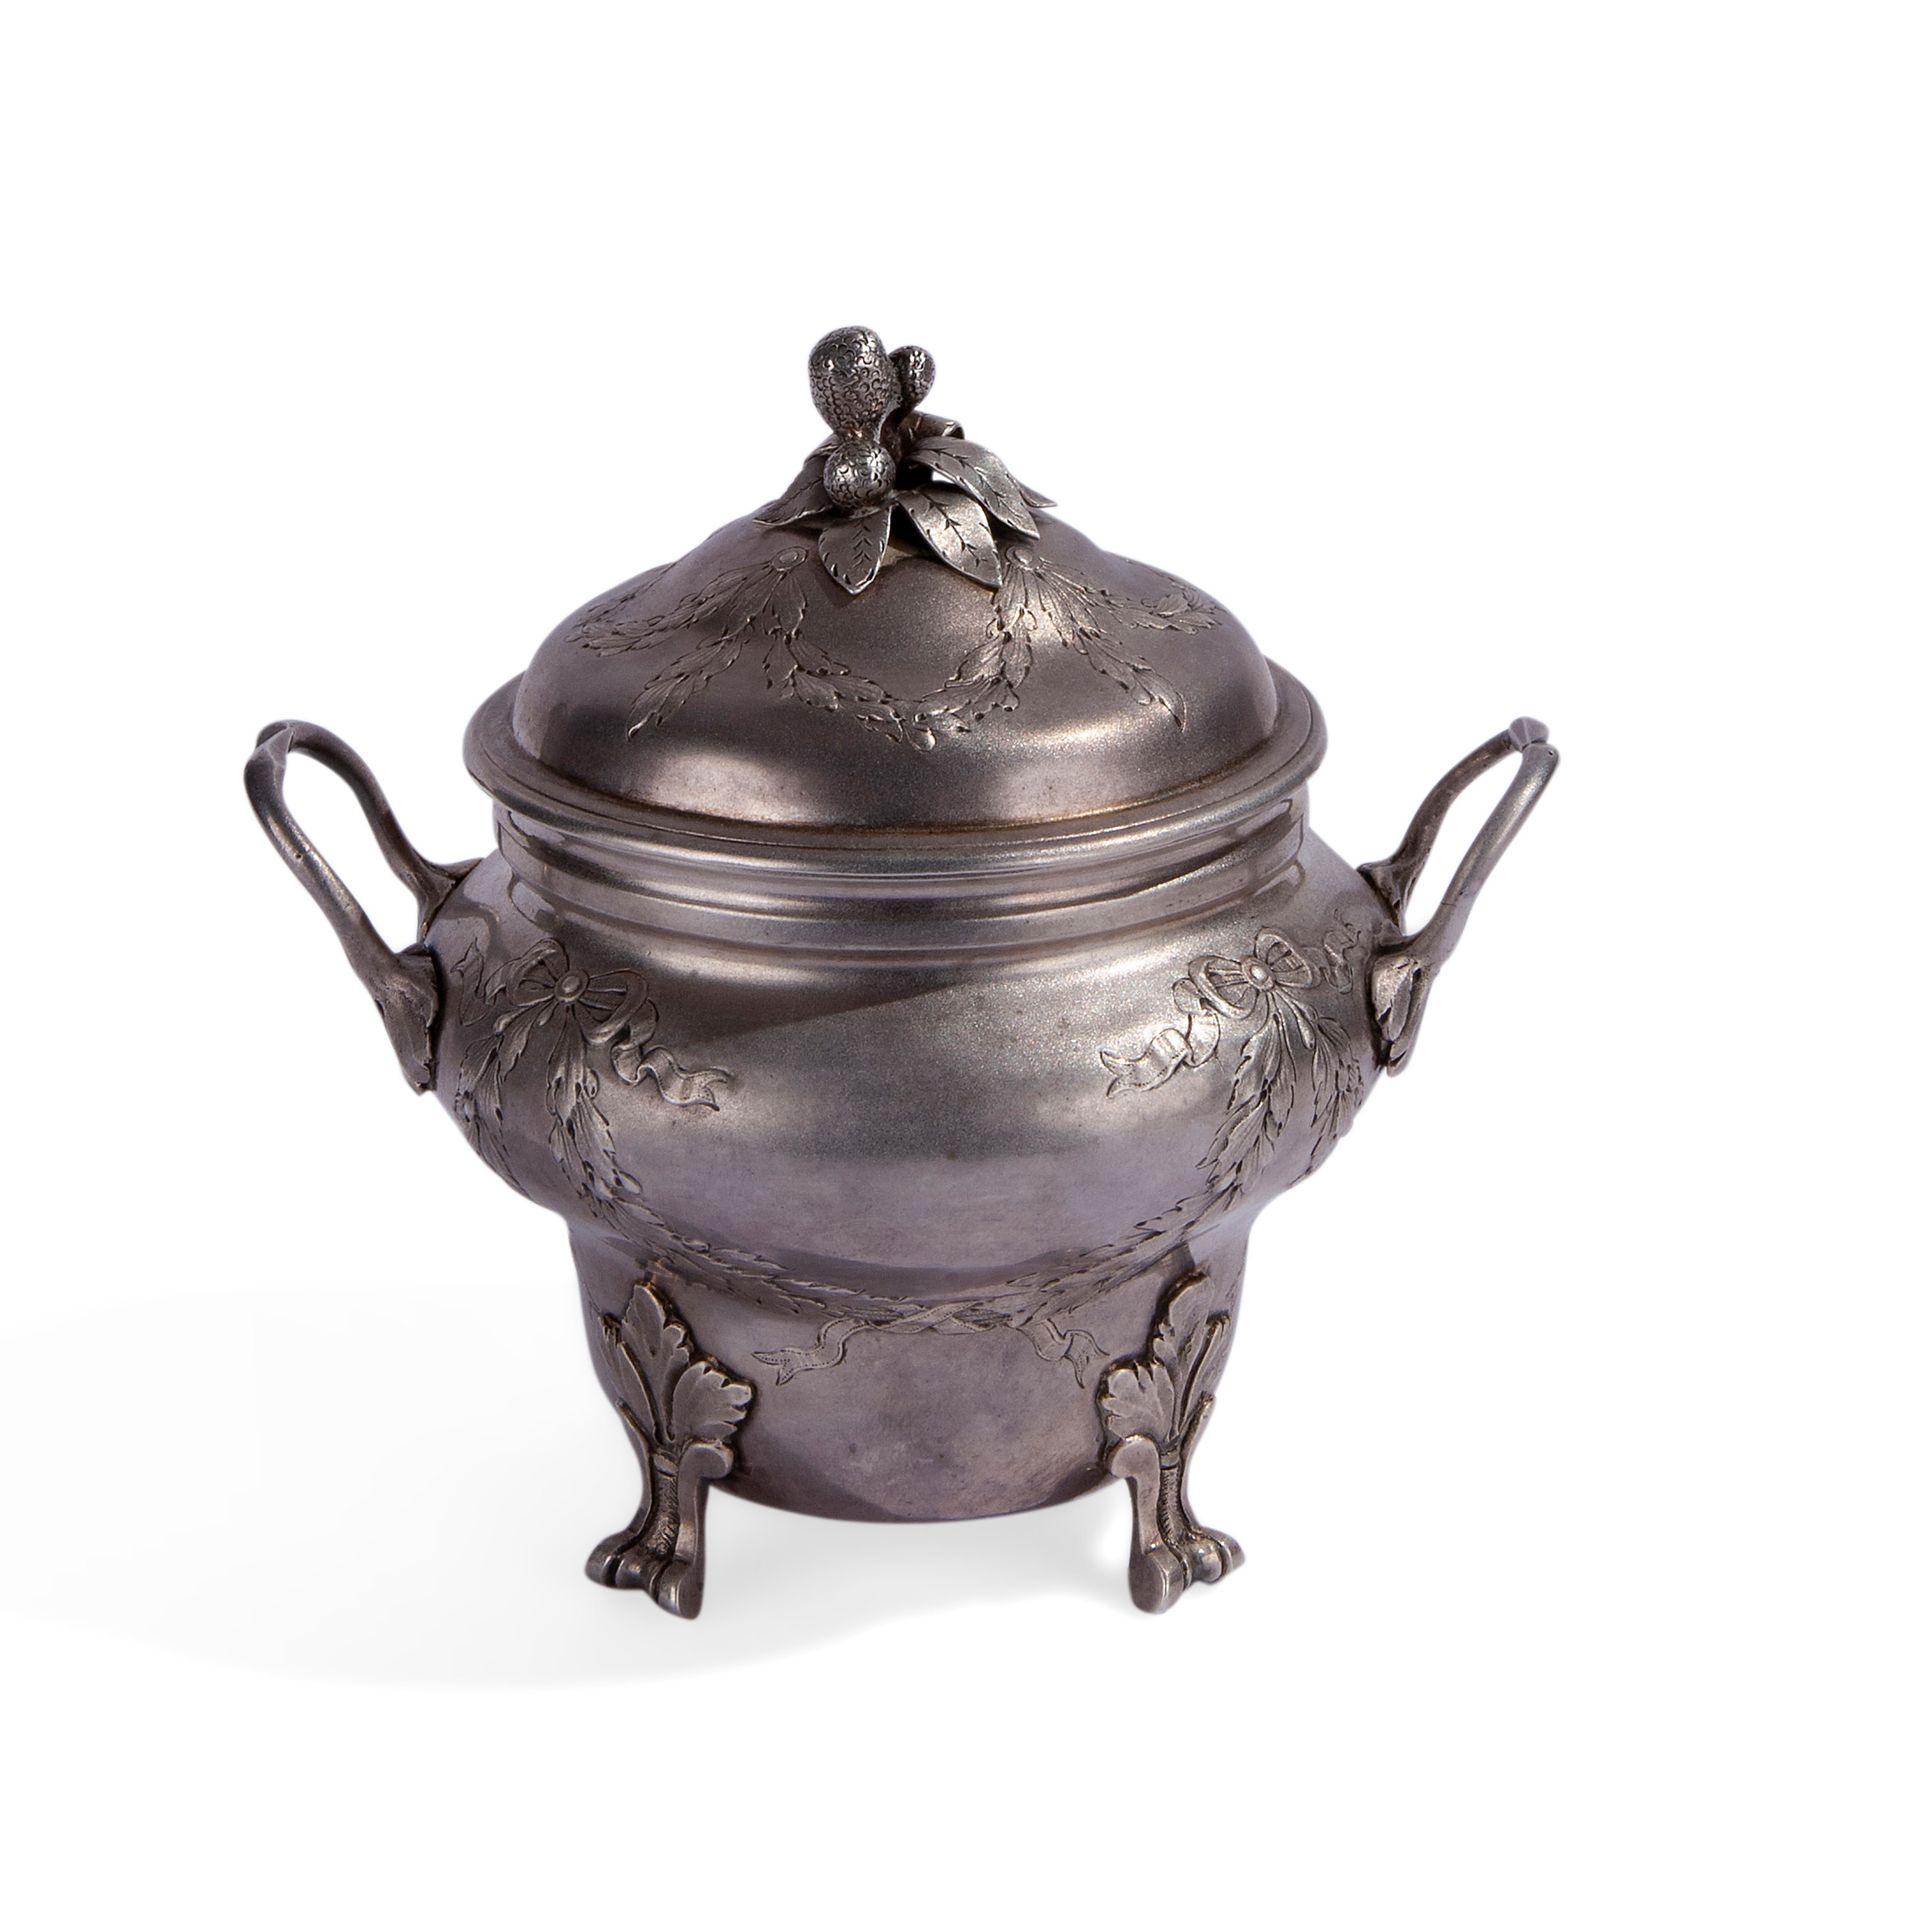 Embossed and chiseled silver sugar bowl, France late 18th century 浮雕和凿刻的银制糖碗，法国1&hellip;